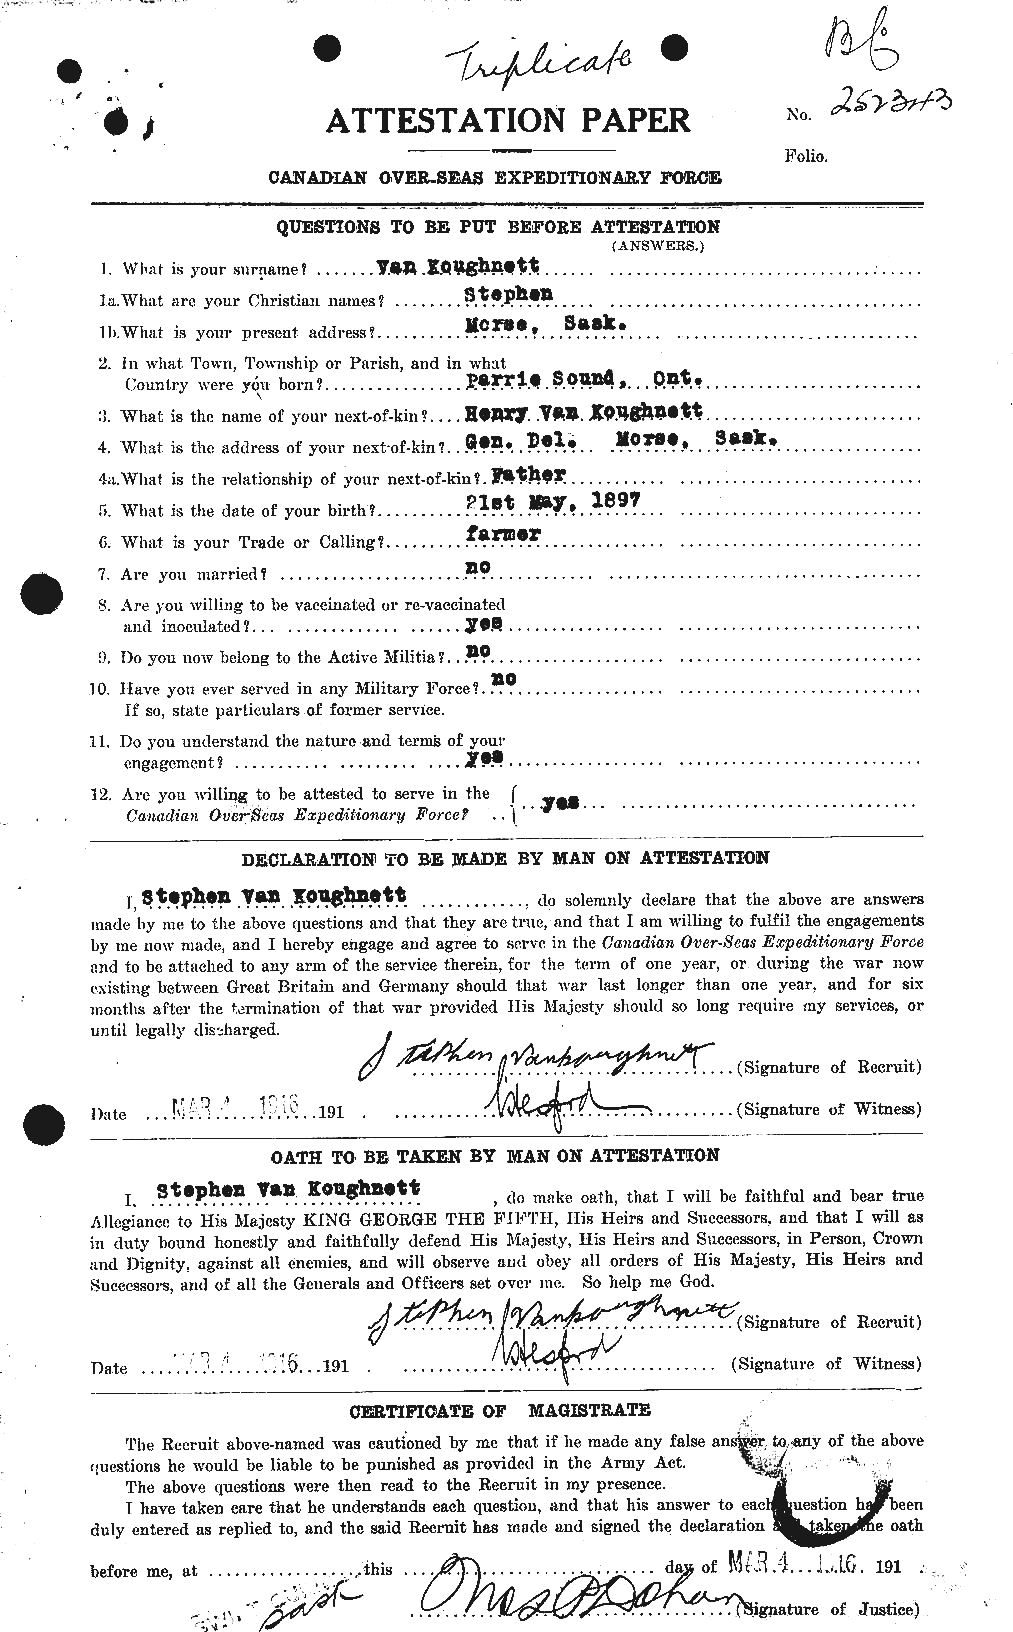 Personnel Records of the First World War - CEF 647549a